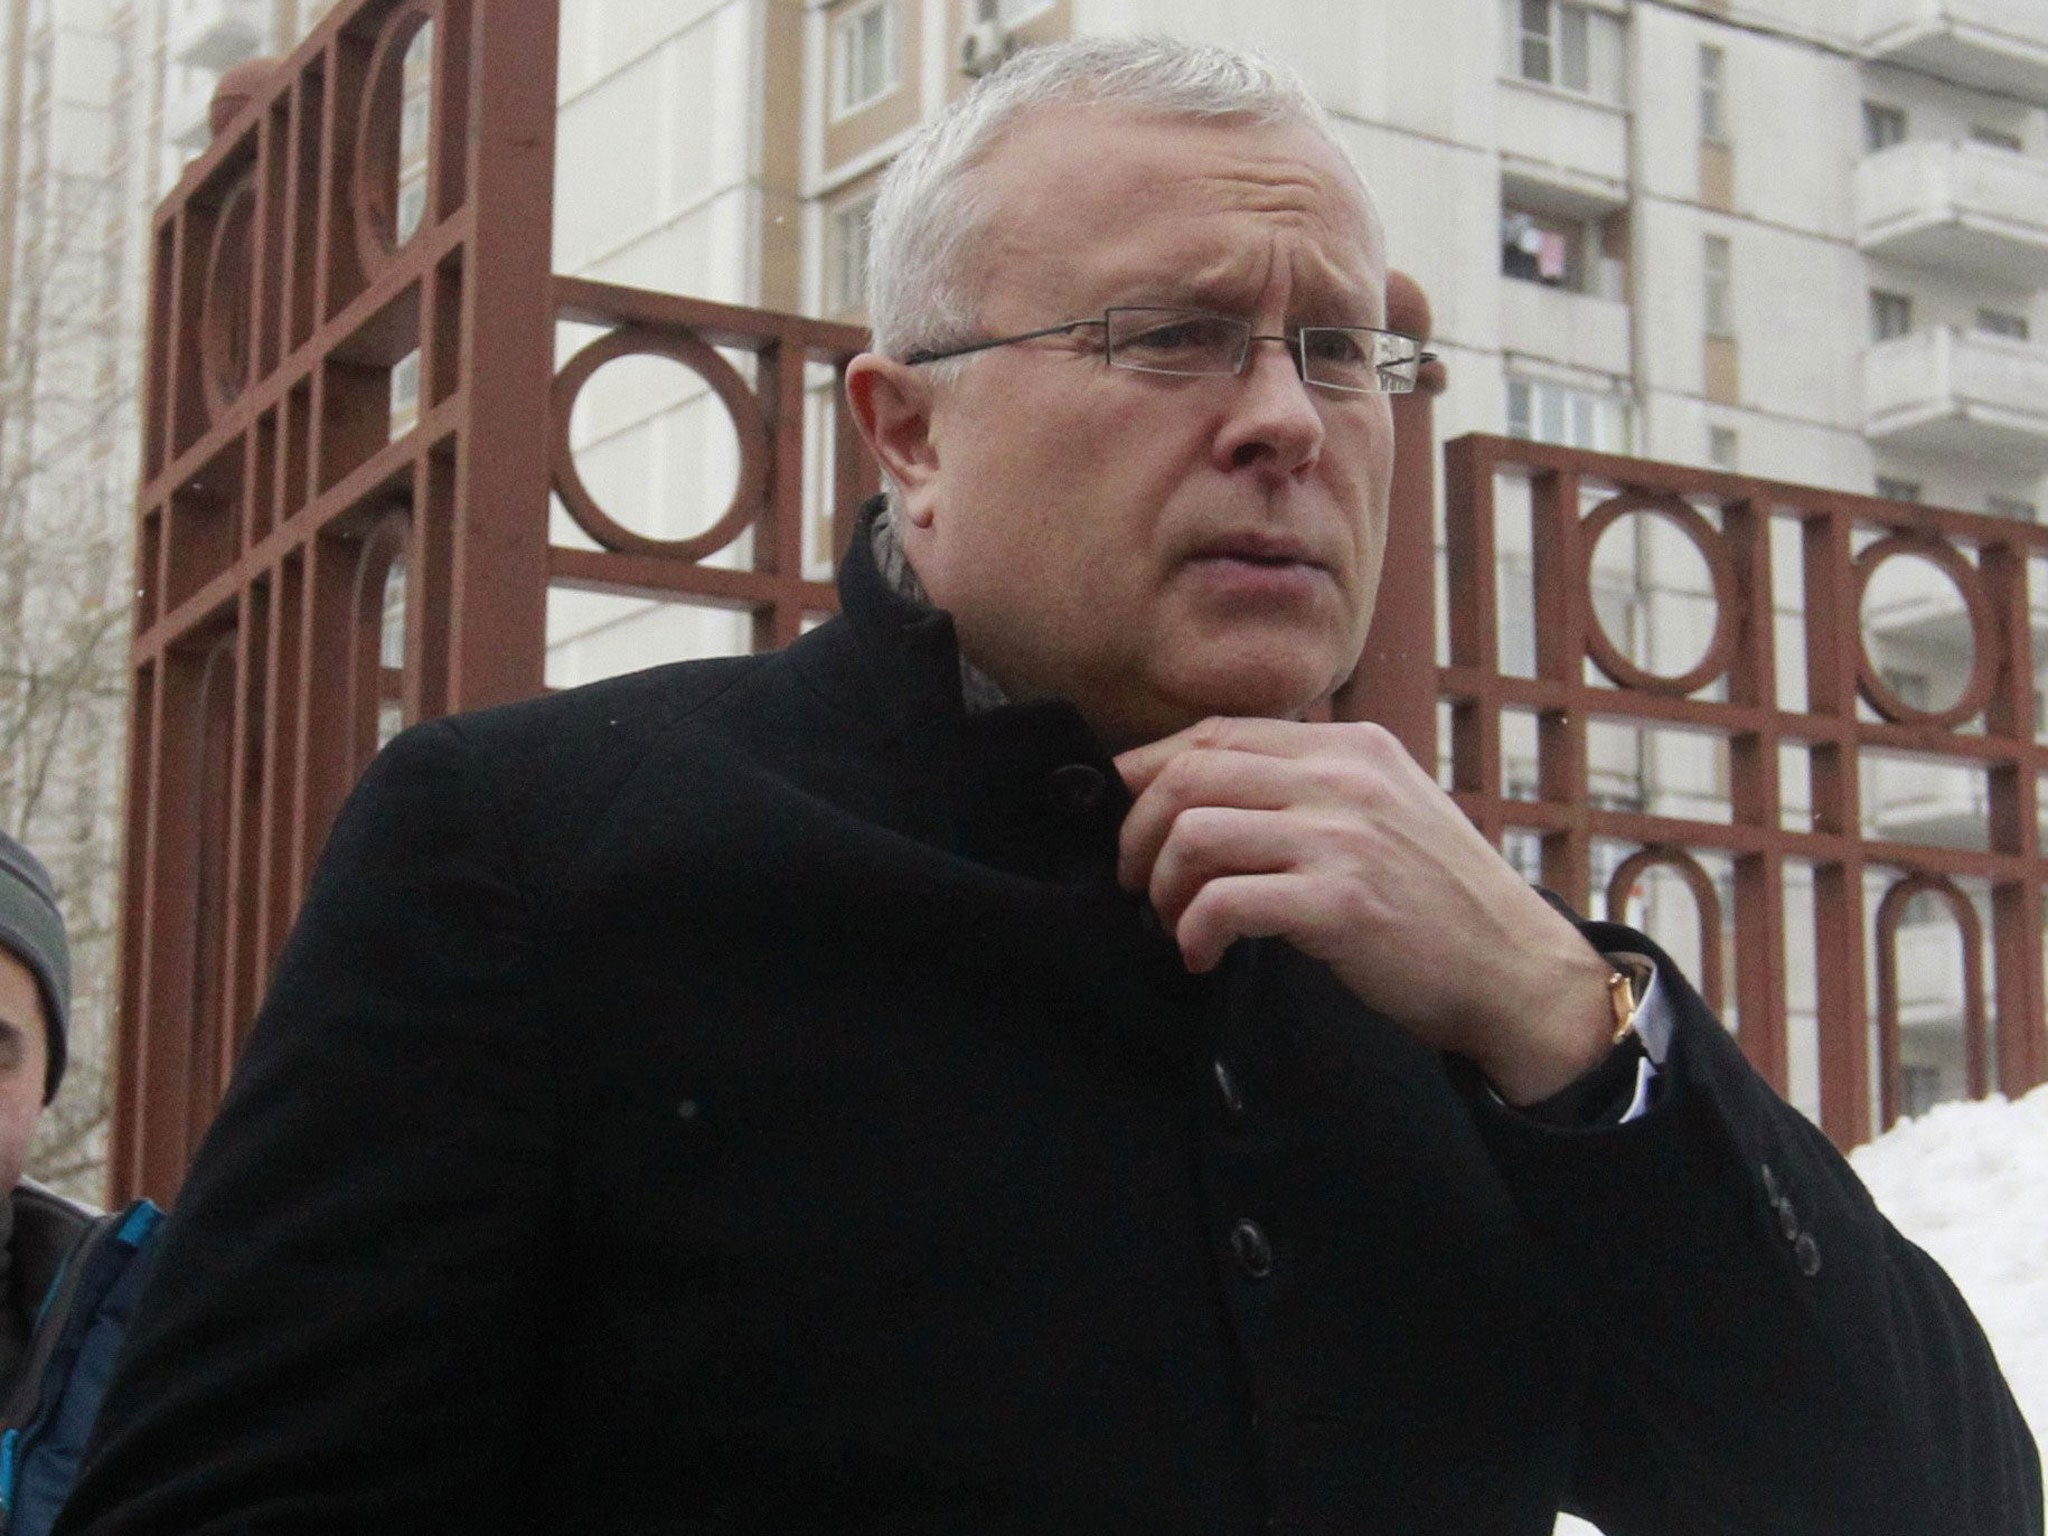 The trial of the businessman Alexander Lebedev has descended into farce as witnesses admitted they had been pressured into attending the court case by investigators